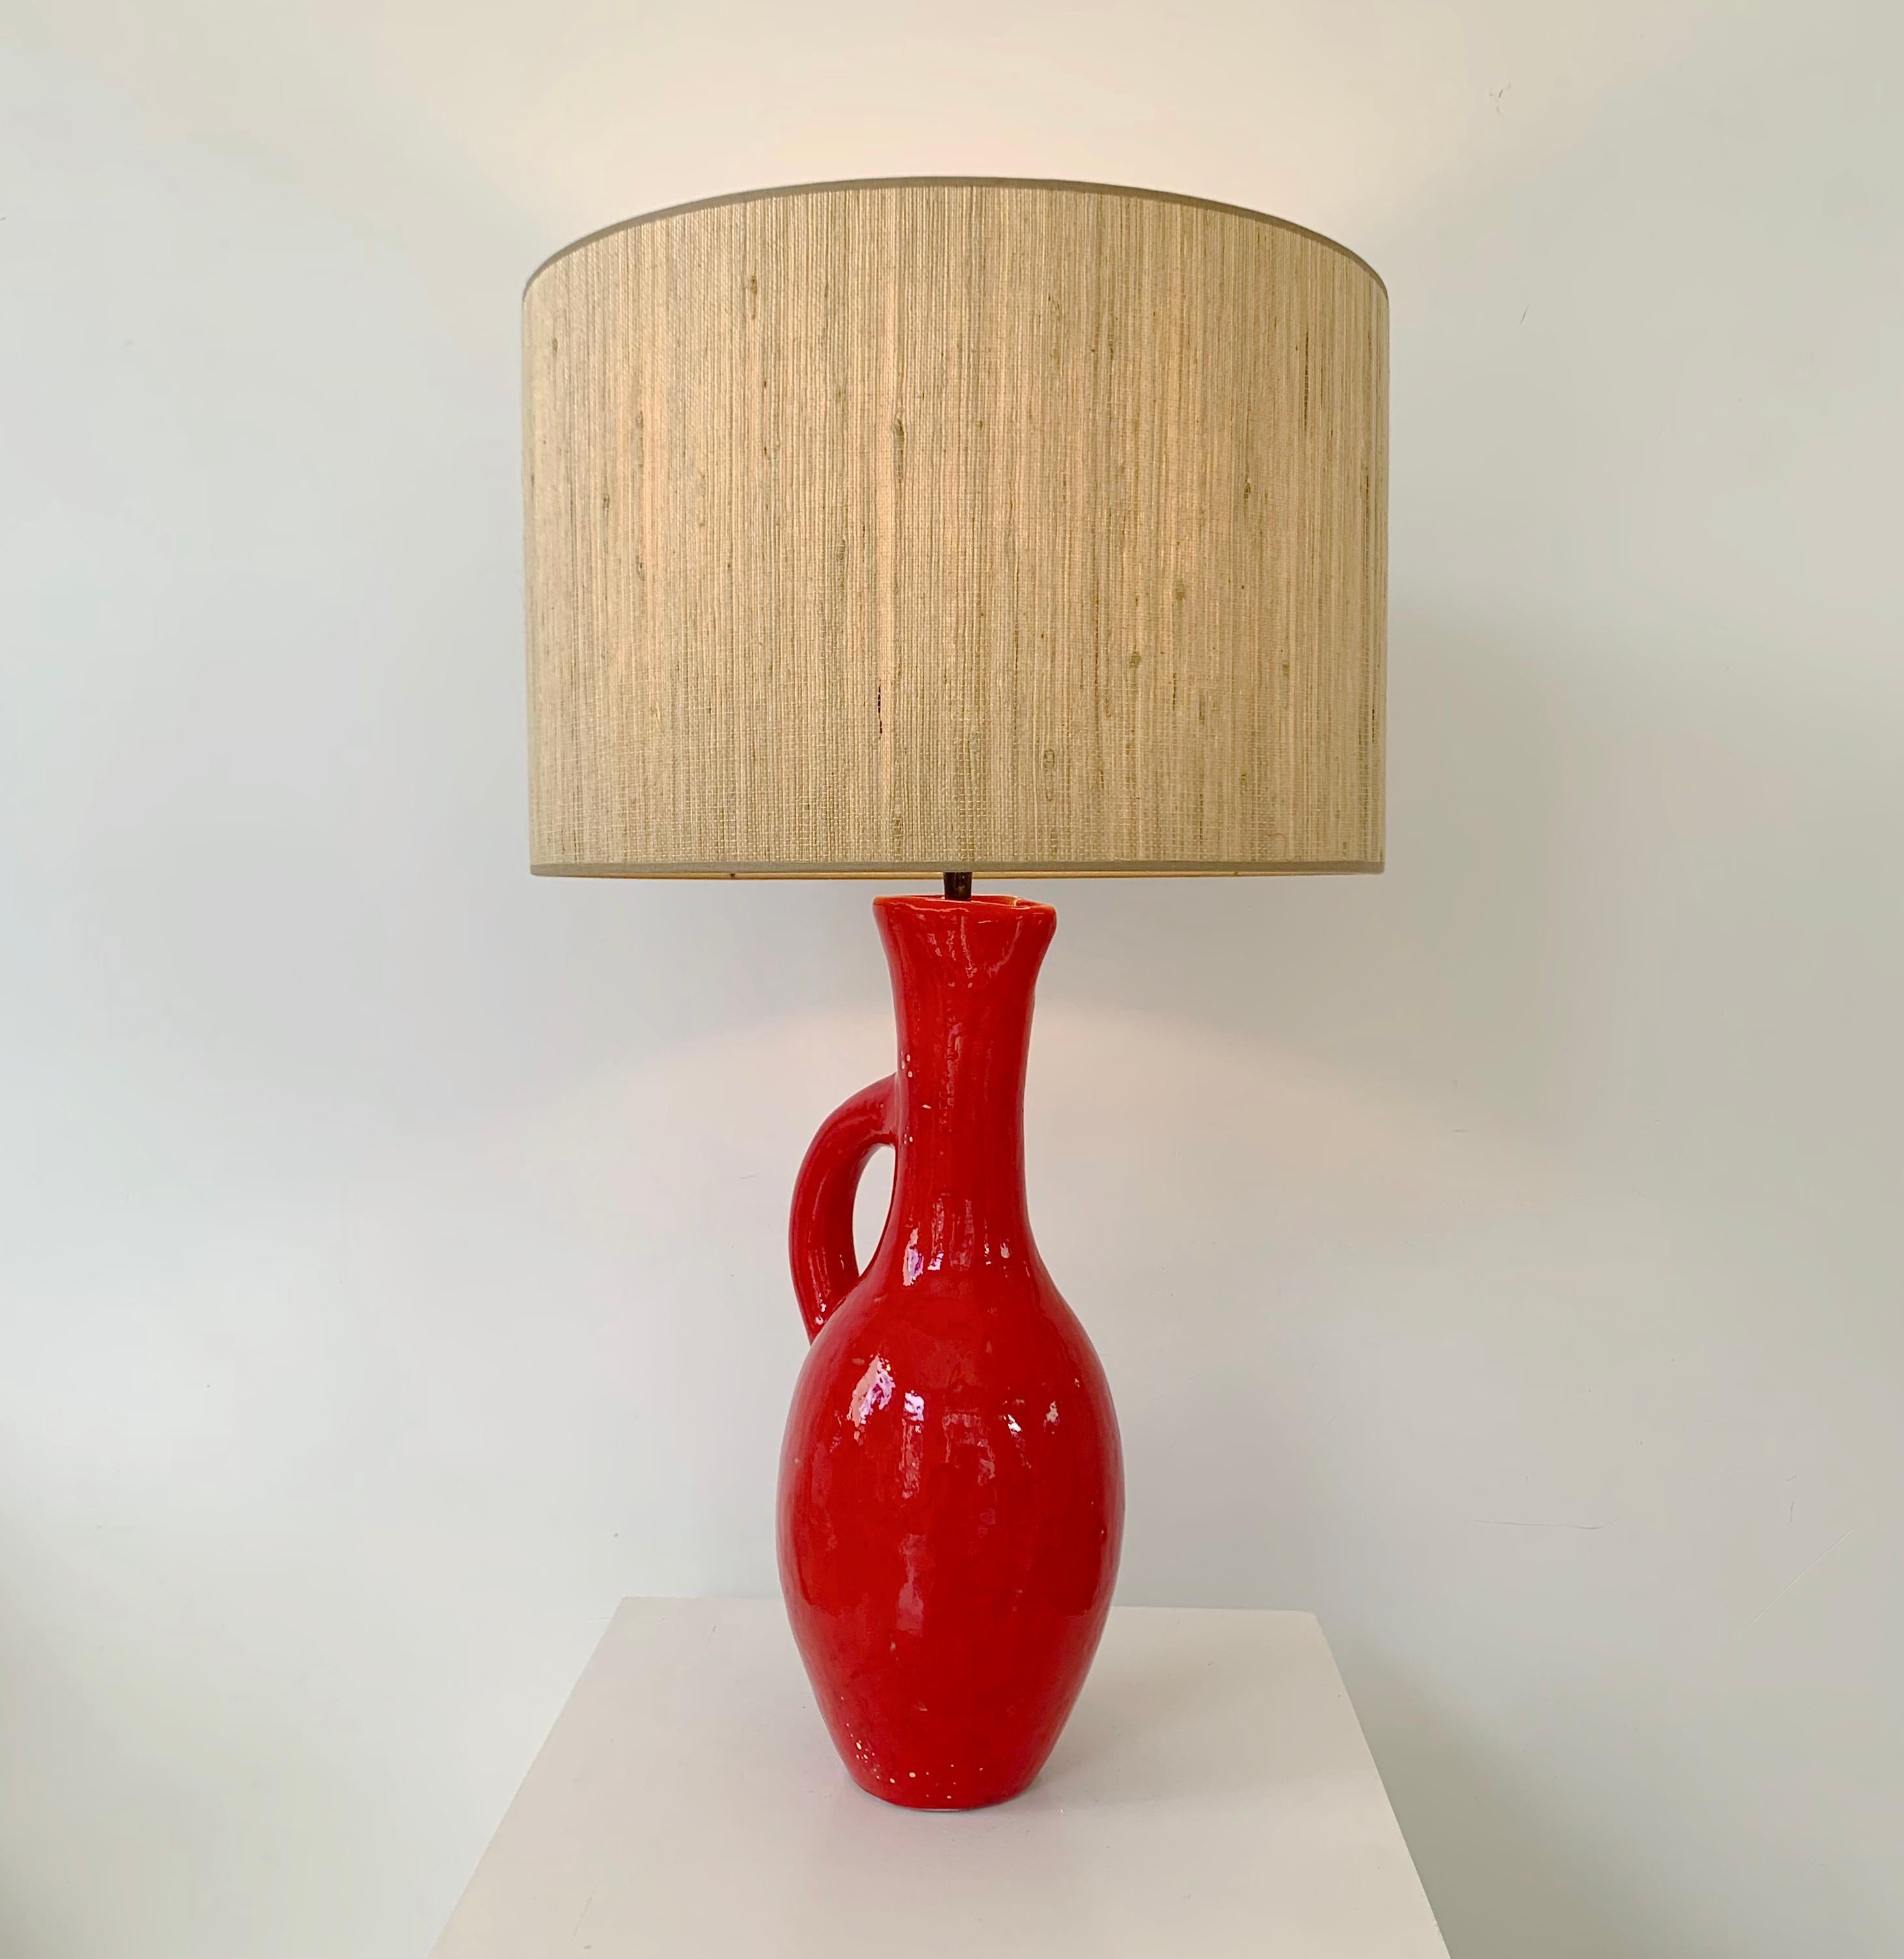 French Les Archanges/Gilbert Valentin Large Signed Table Lamp, 1950s, Vallauris.